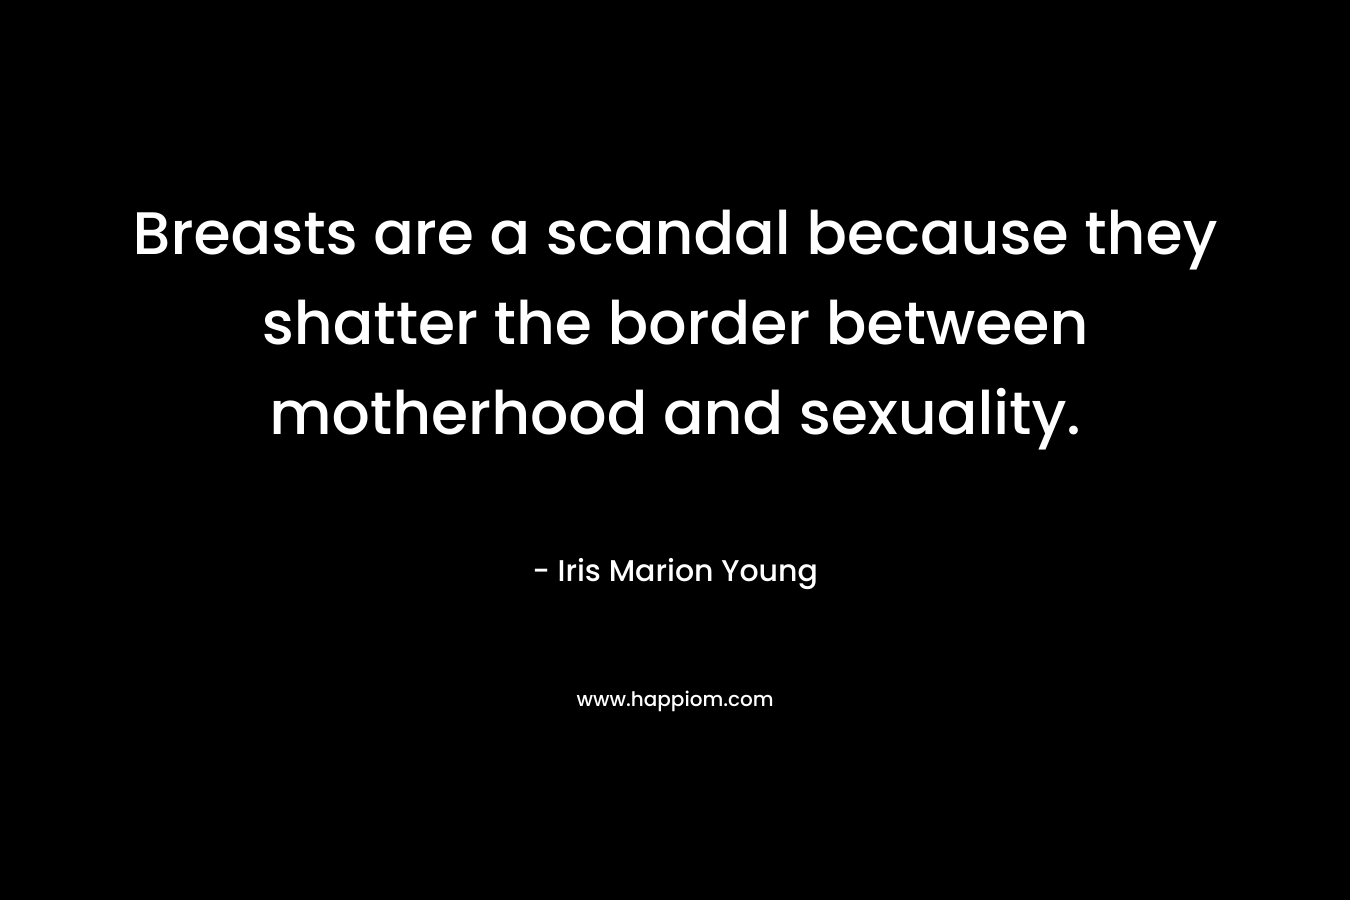 Breasts are a scandal because they shatter the border between motherhood and sexuality. – Iris Marion Young